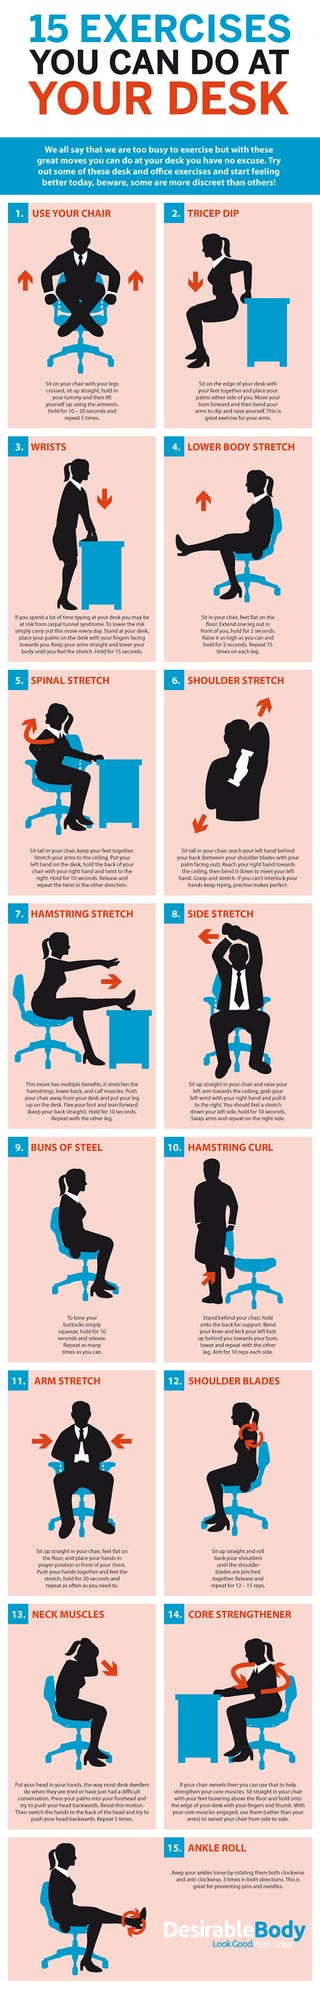 This Graphic Shows Bunch of Desk-Based Exercises for the Office